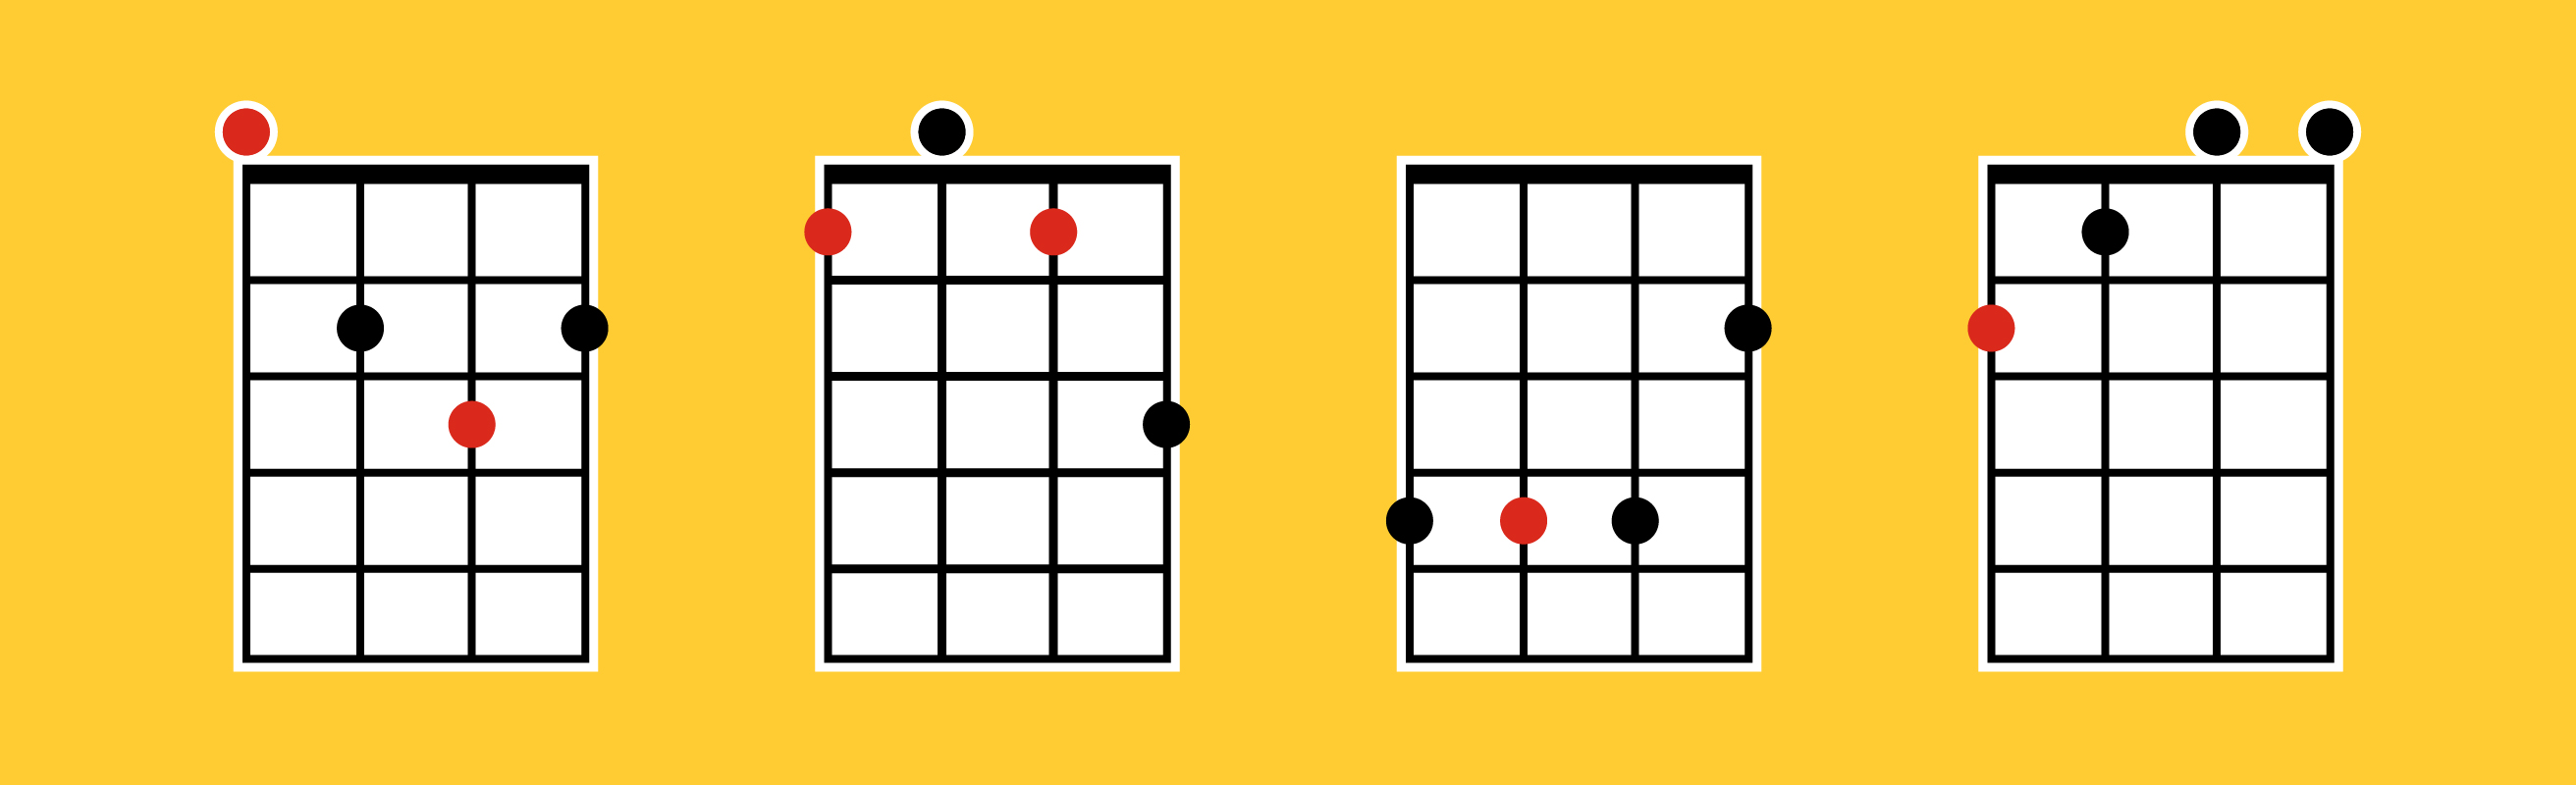 A Beginners Guide To Ukulele Chords | Fender